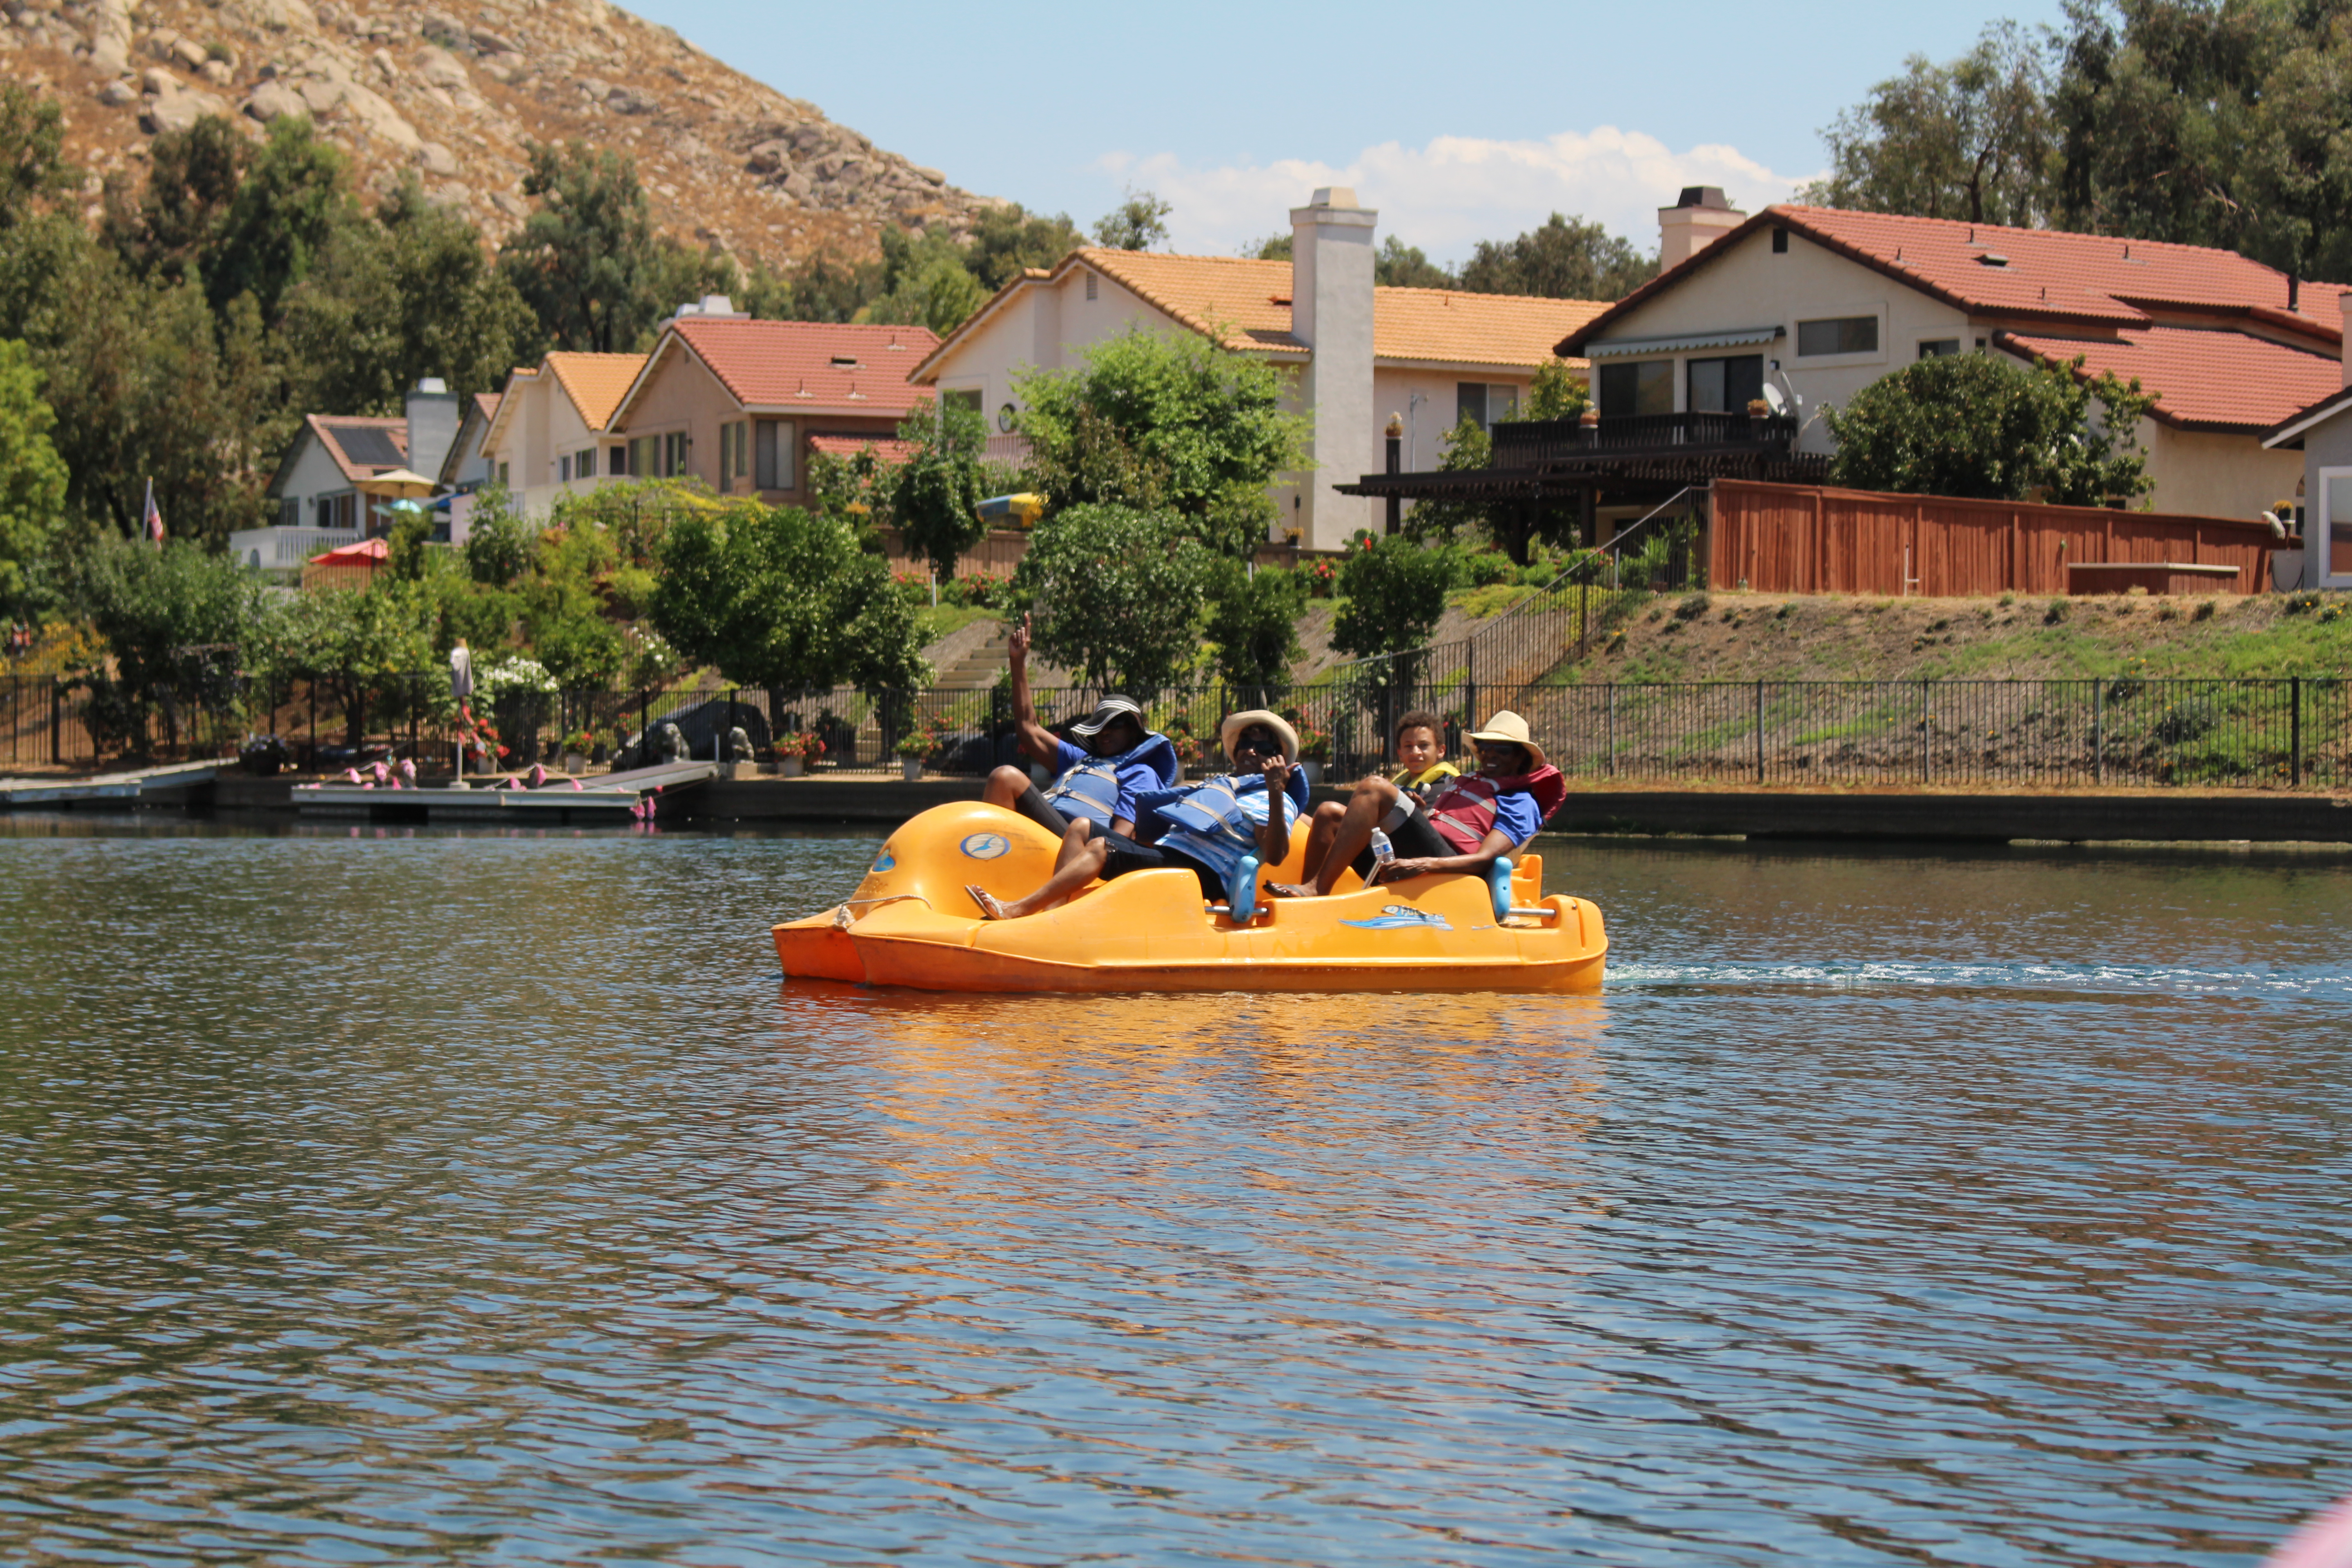 A third group driving a paddle boat on the lake